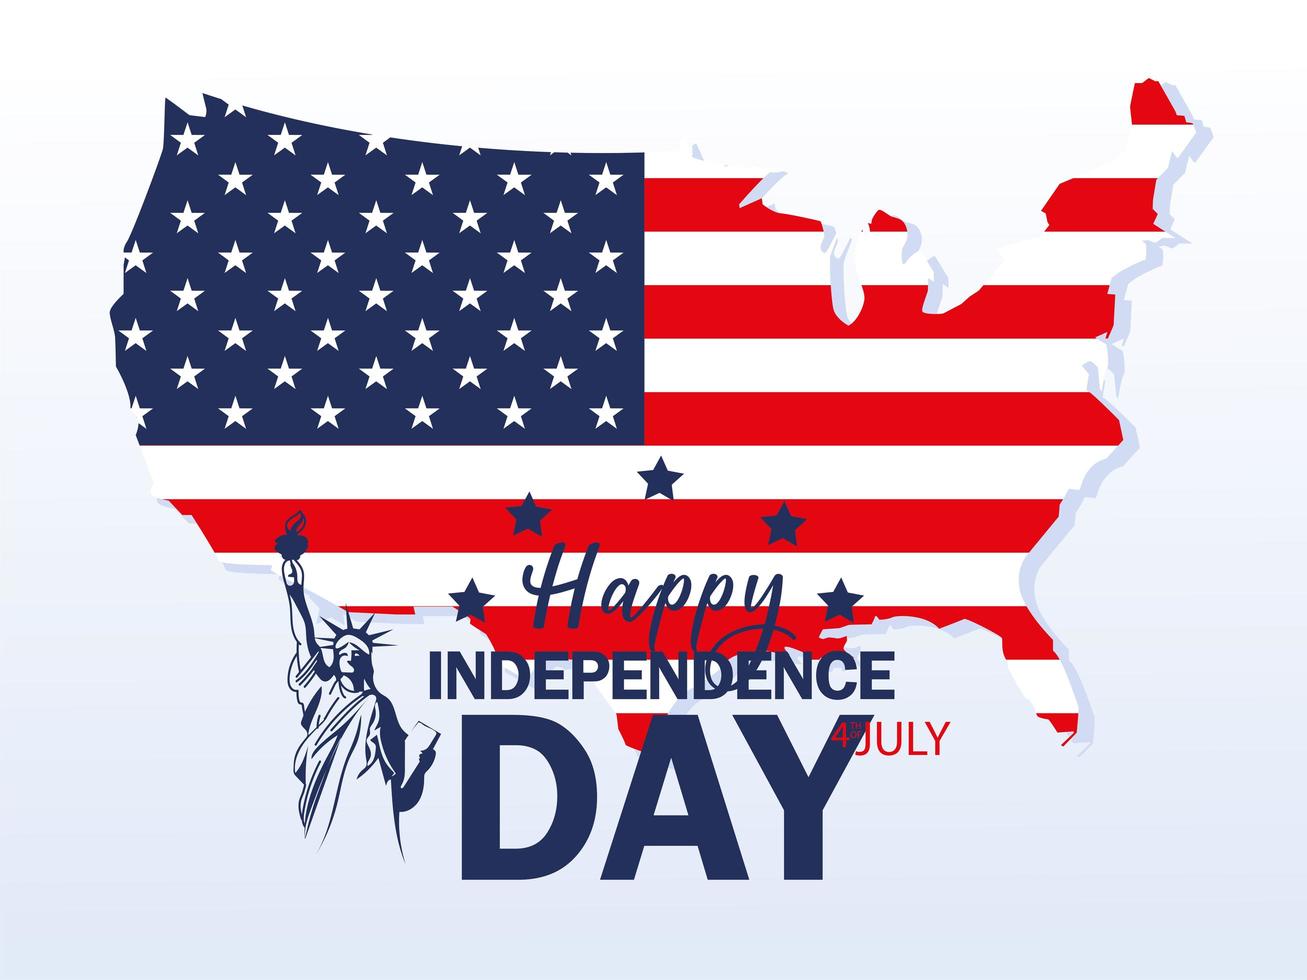 USA independence day vector